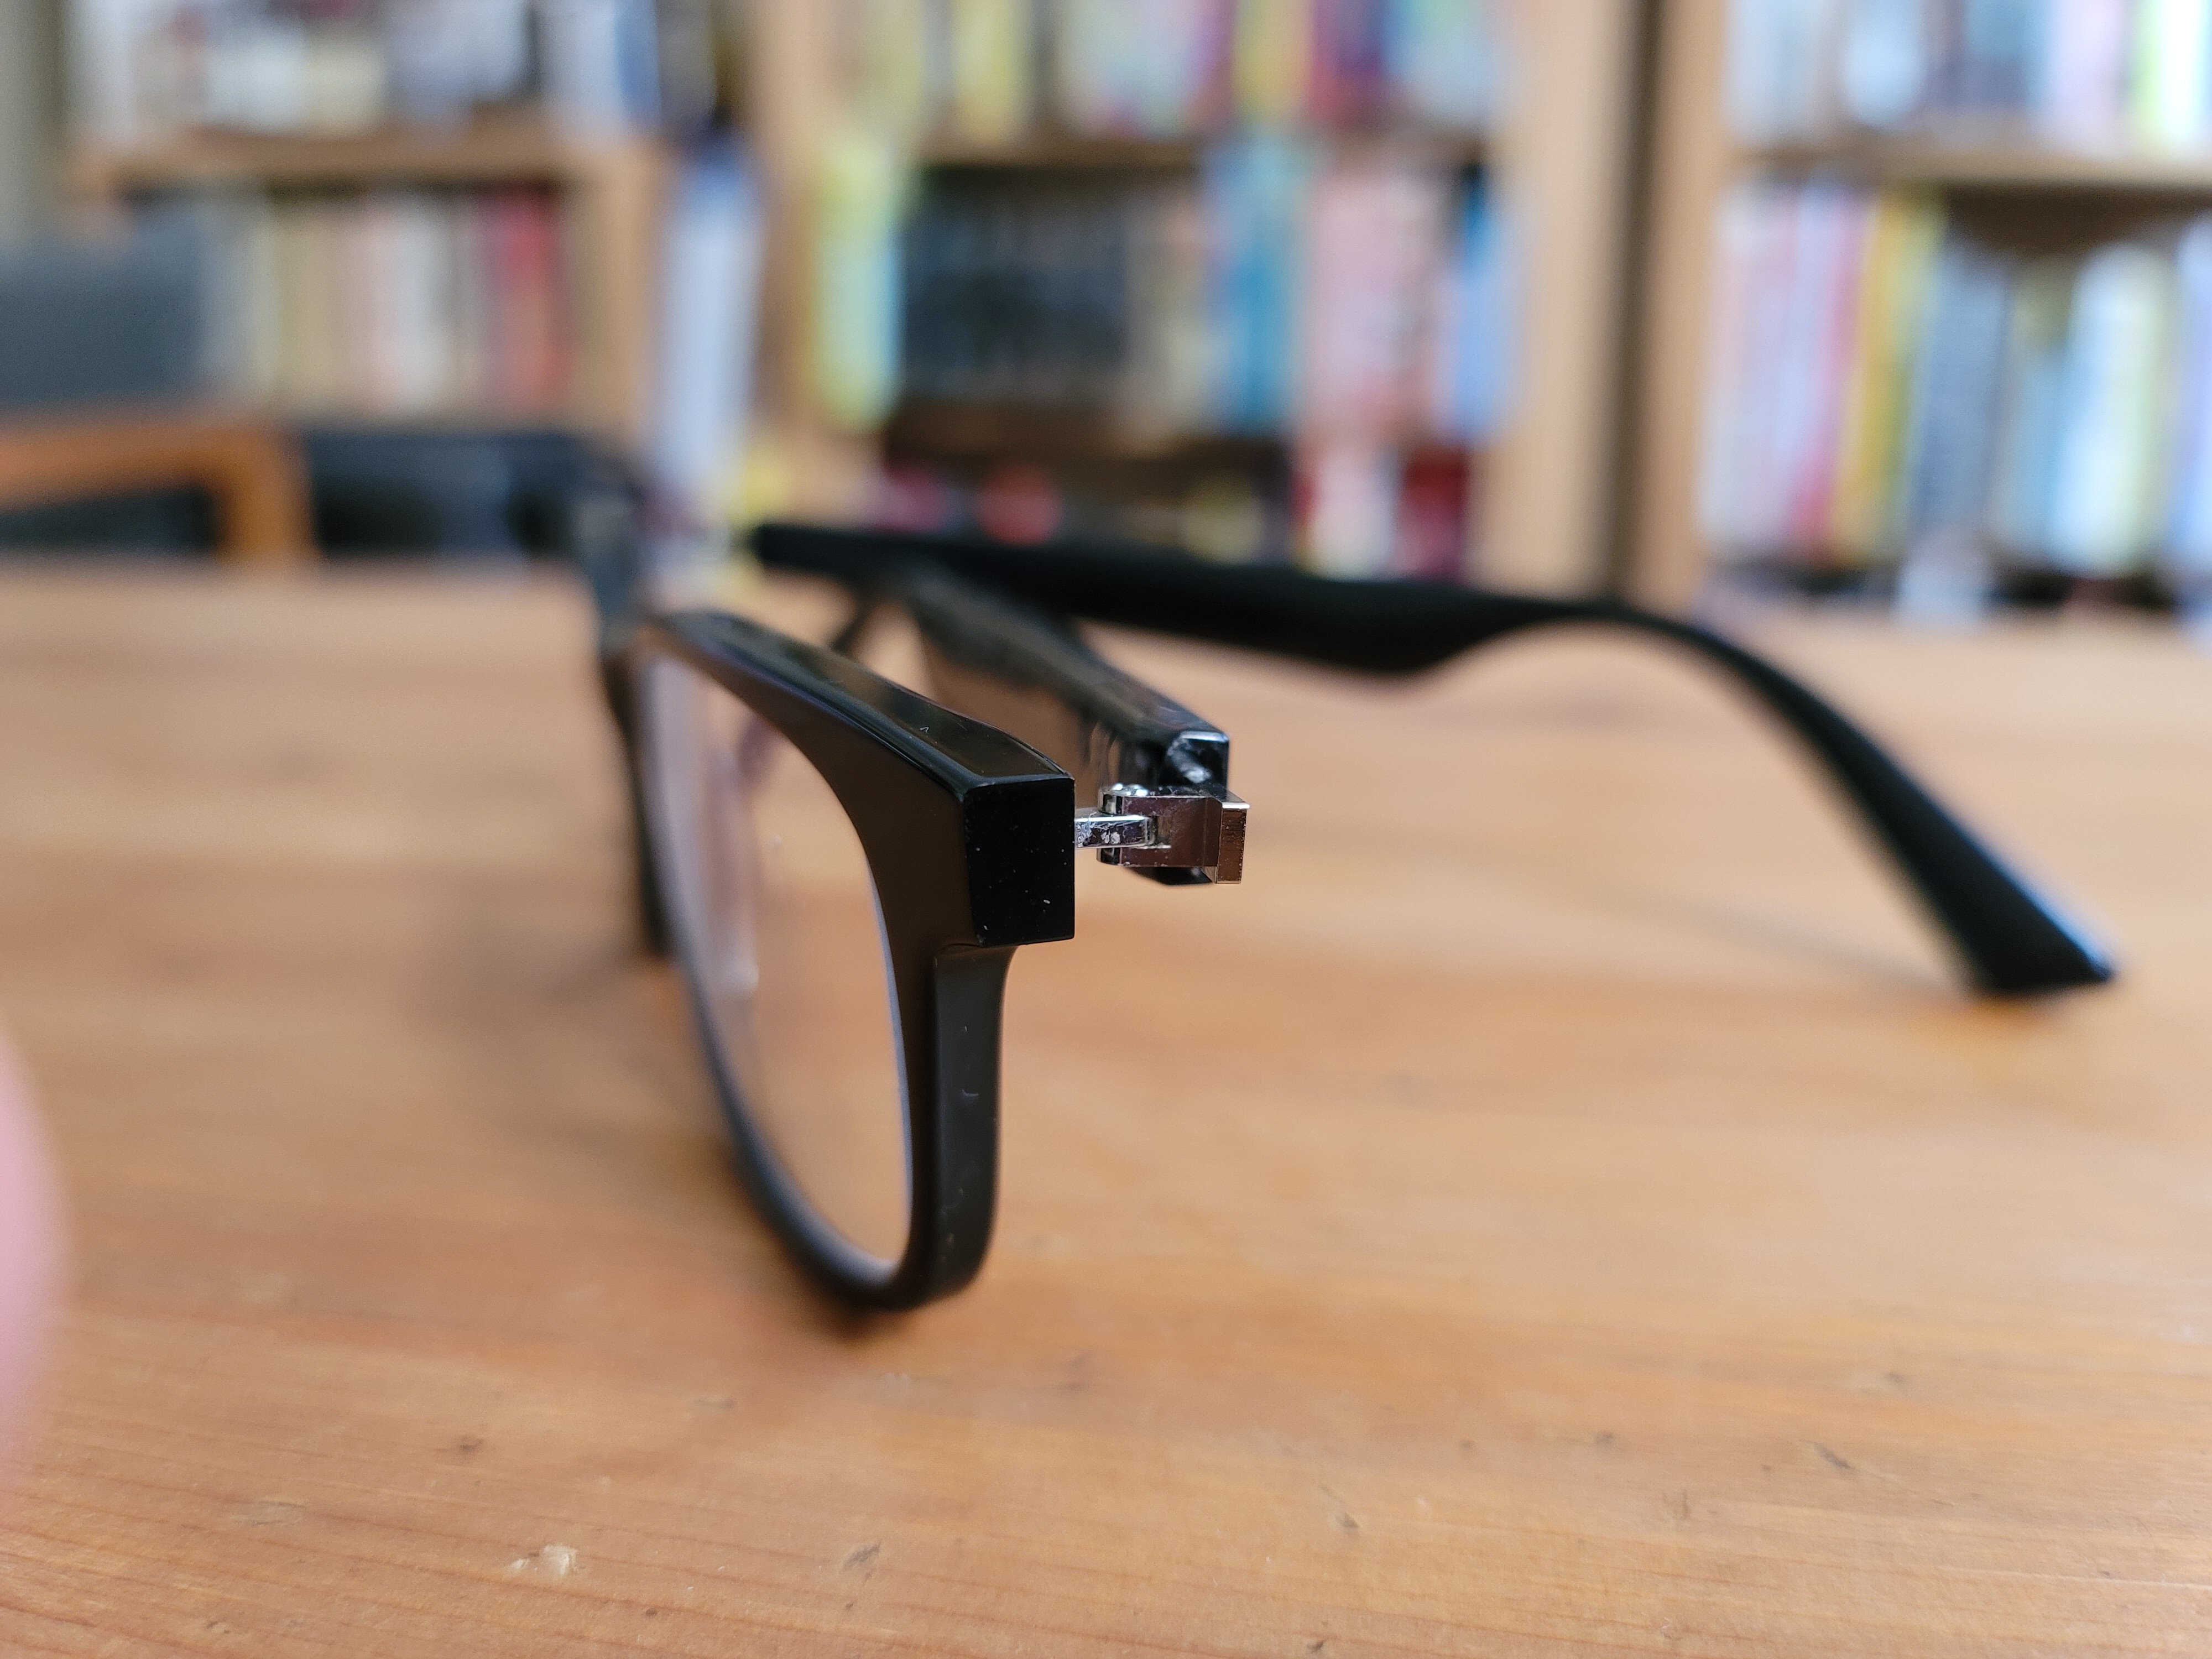 Vue's $179 Lite smart glasses have built-in speakers for music and 